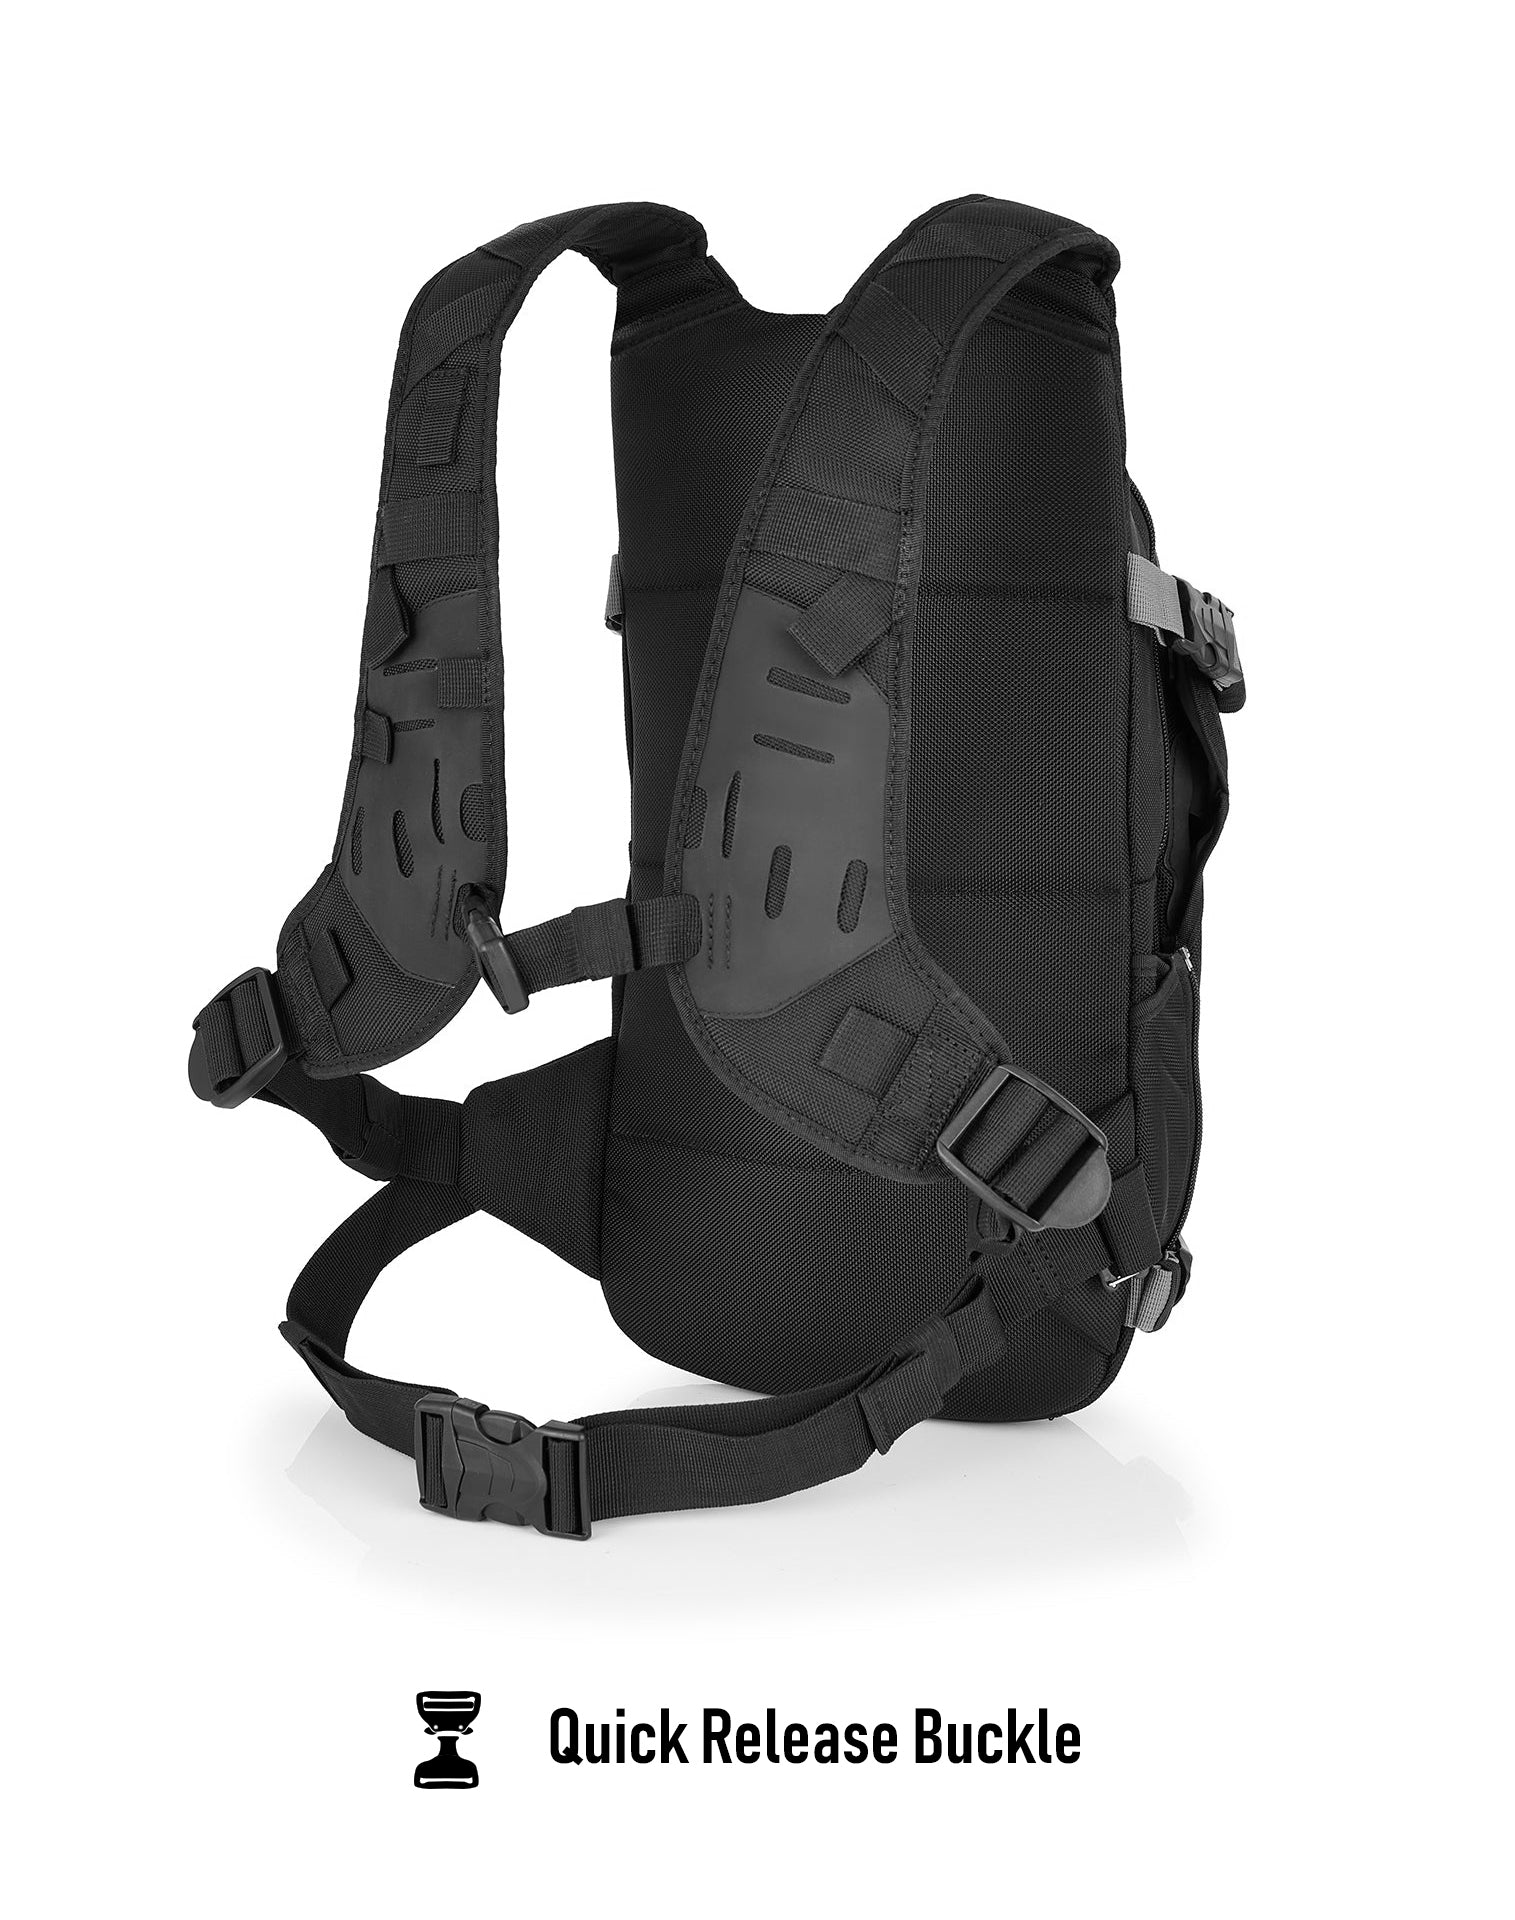 Viking Explorer 12L Adventure Touring Backpack Quick Release Buckle